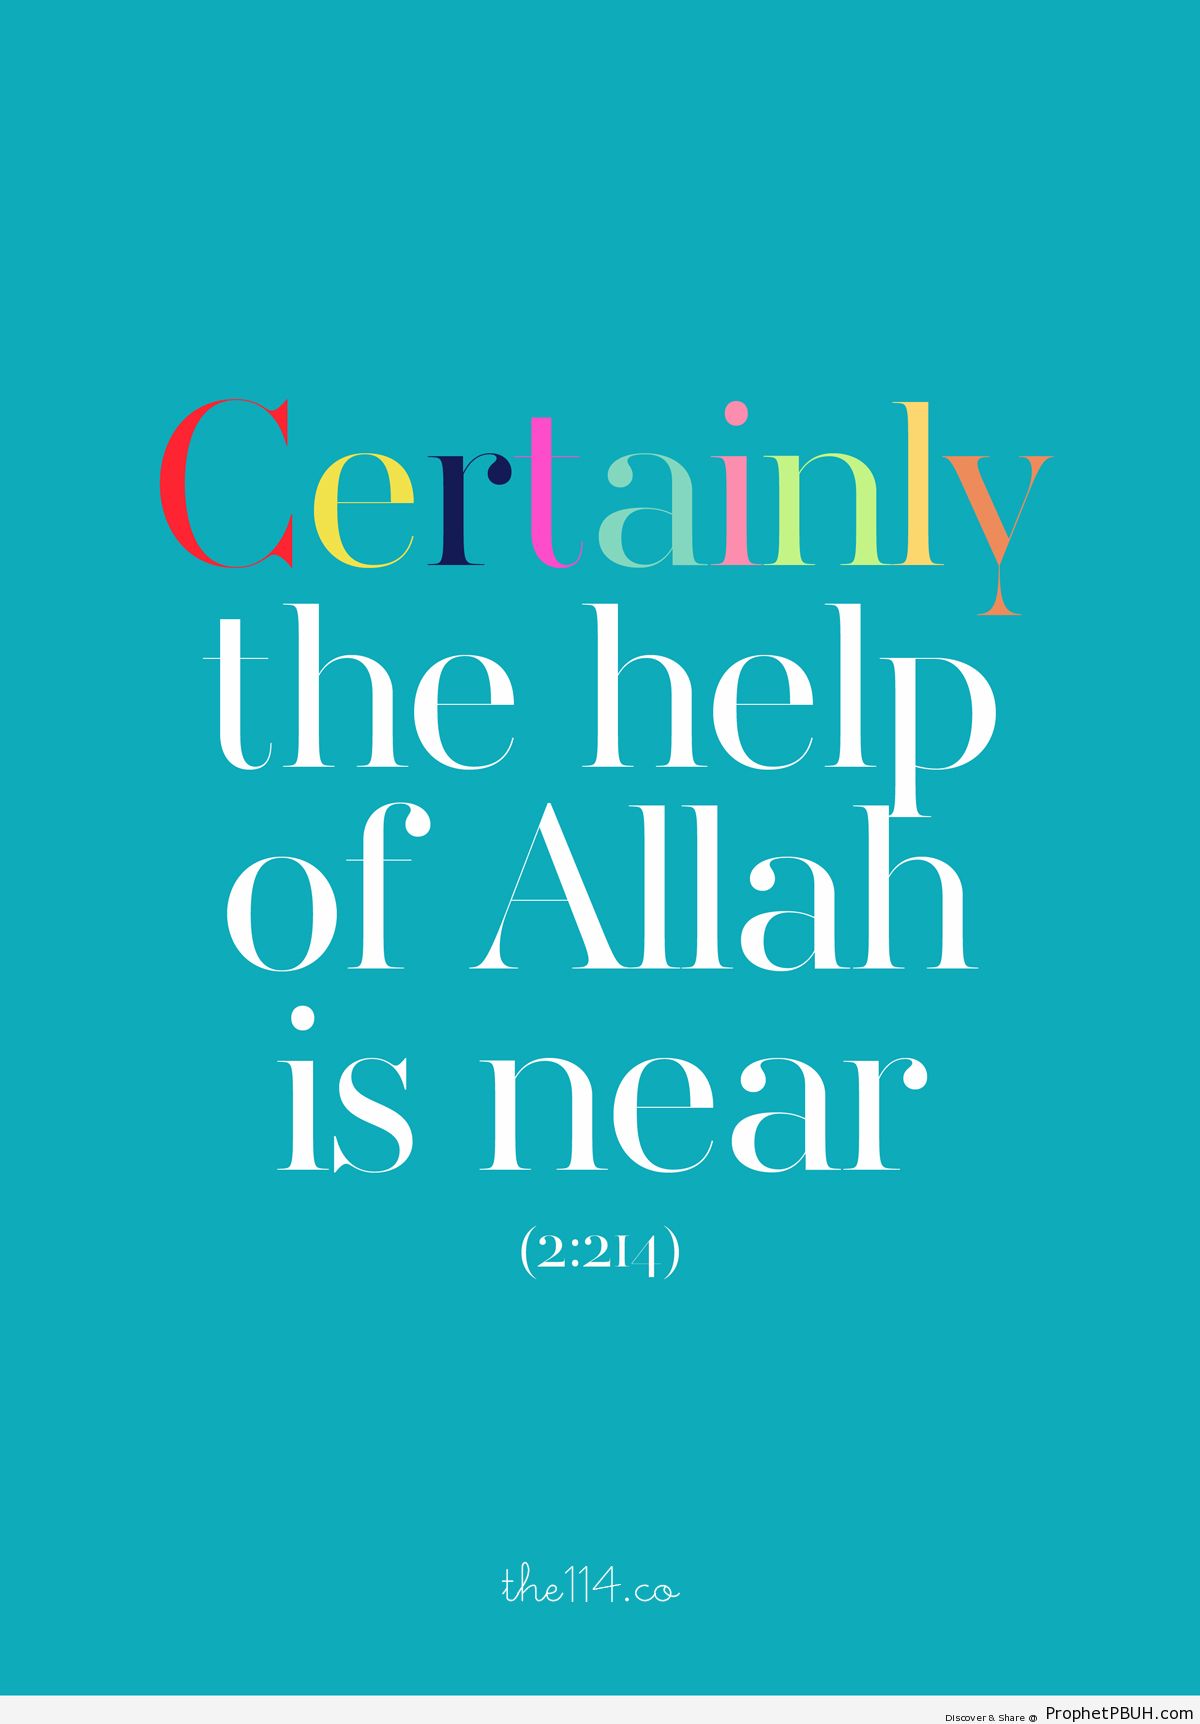 Certainly - Islamic Quotes, Hadiths, Duas-001